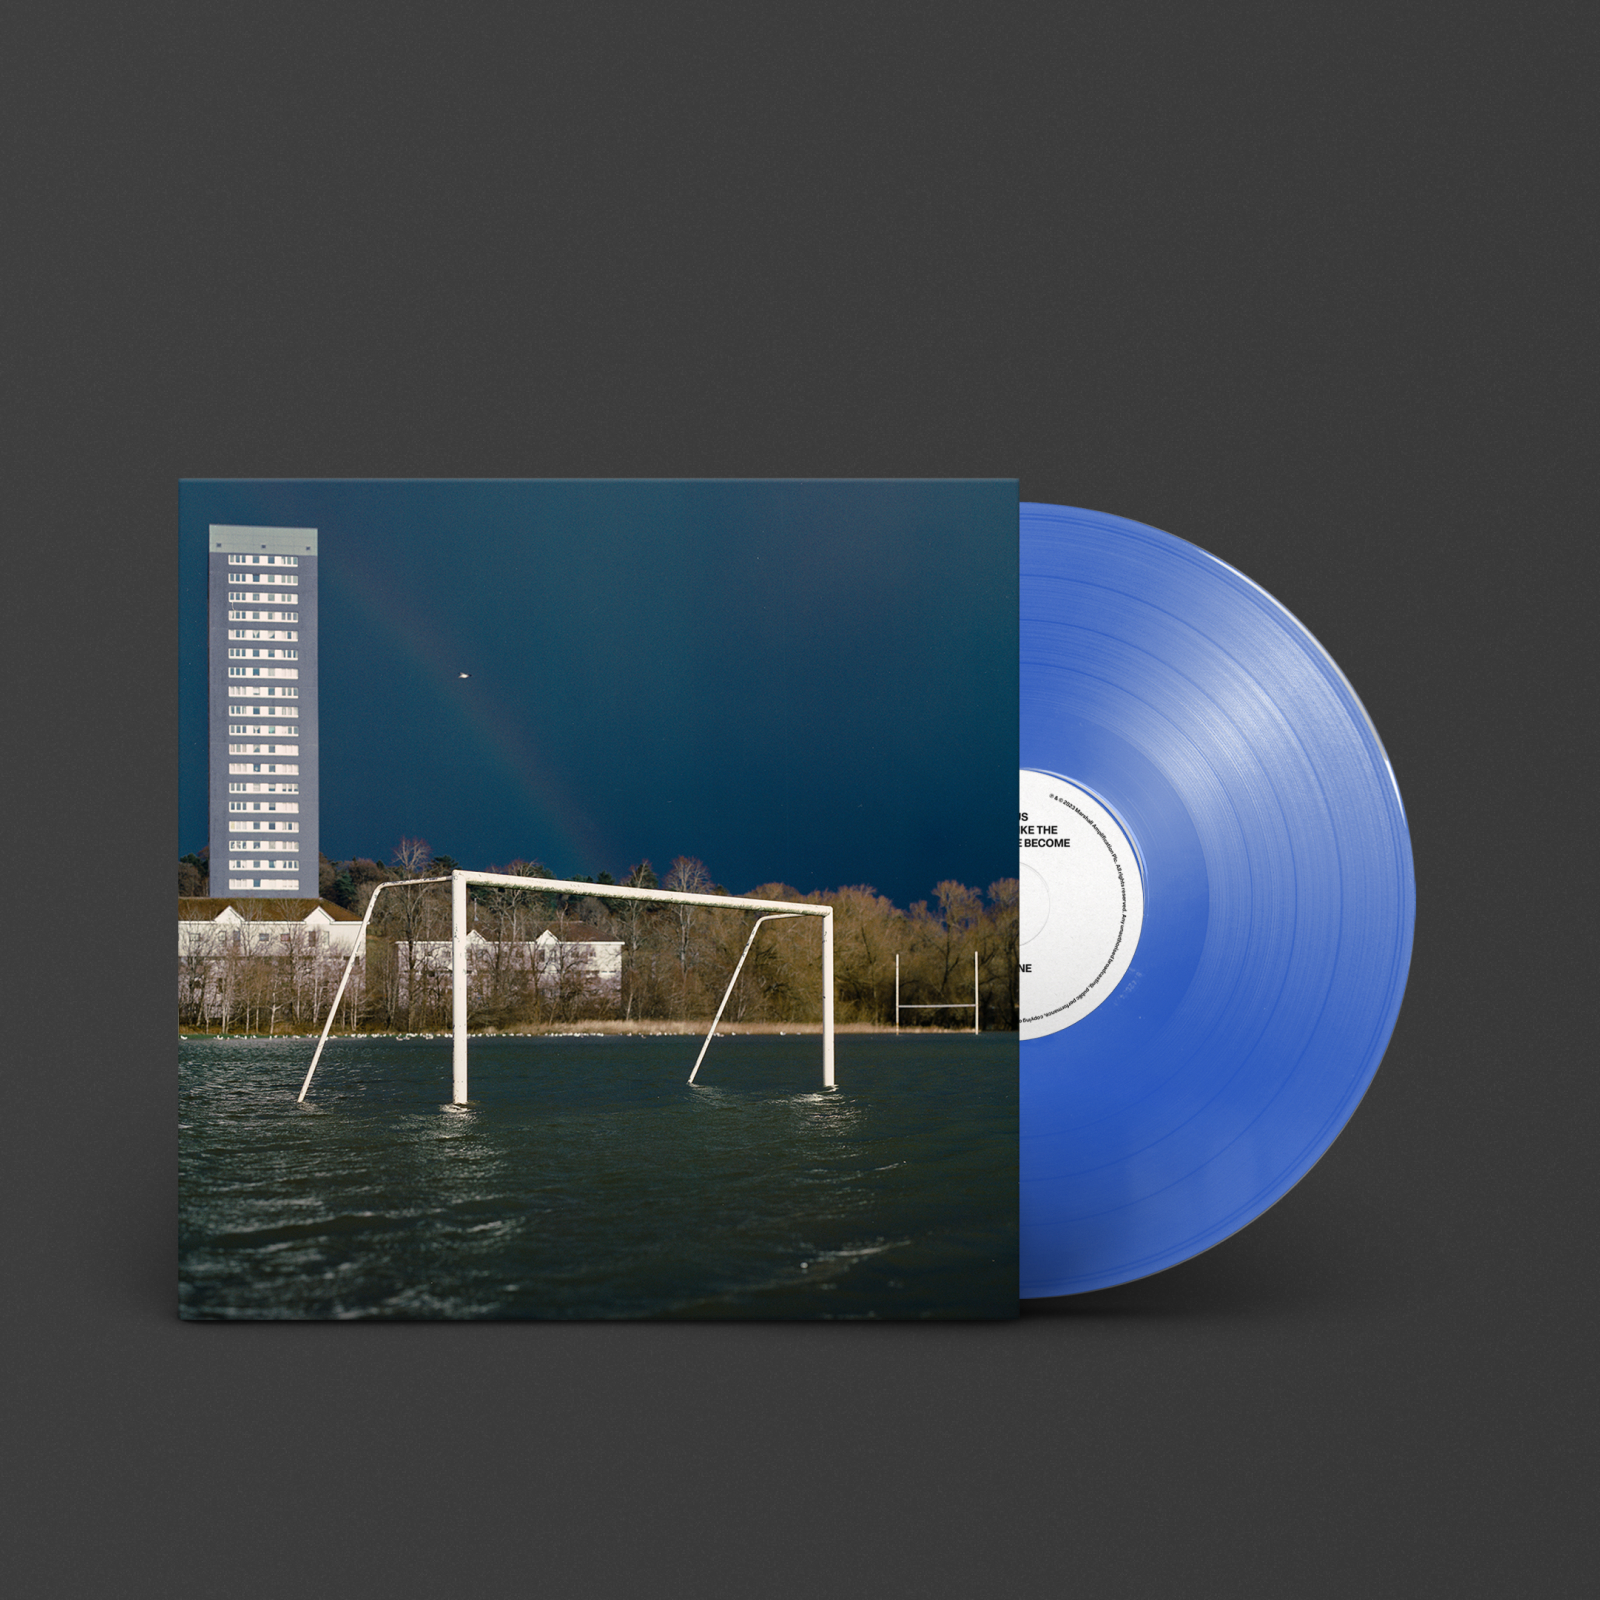 A blue vinyl lp of "We Don't Like The People We've Become" by Gallus, with a building in the background.